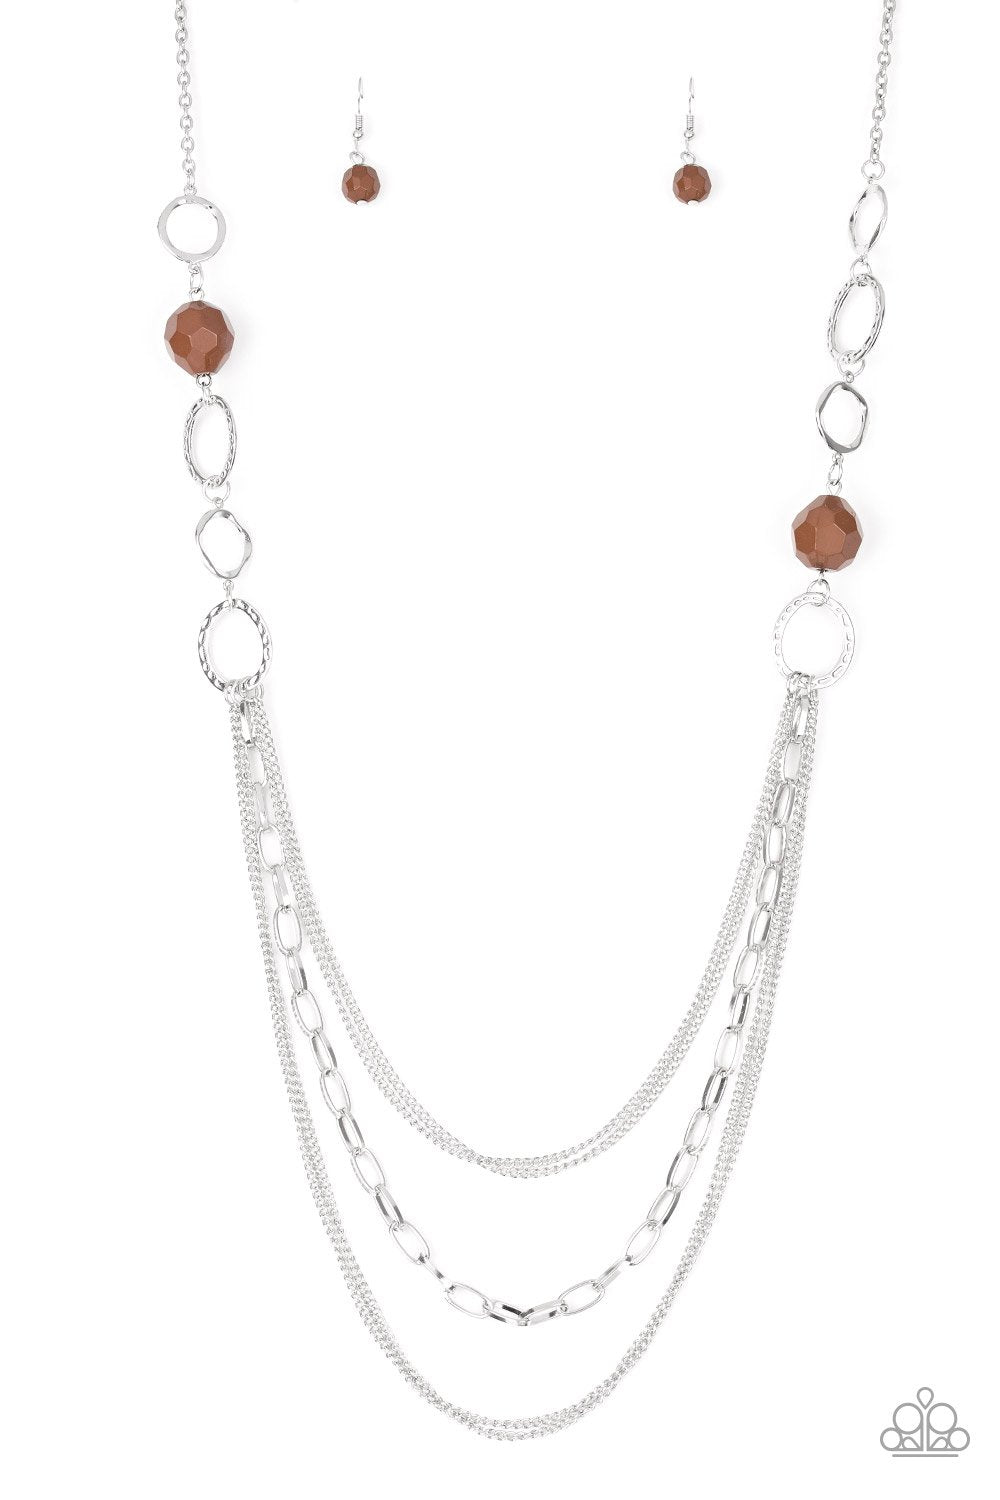 Margarita Masquerades Brown and Silver Necklace - Paparazzi Accessories - lightbox -CarasShop.com - $5 Jewelry by Cara Jewels